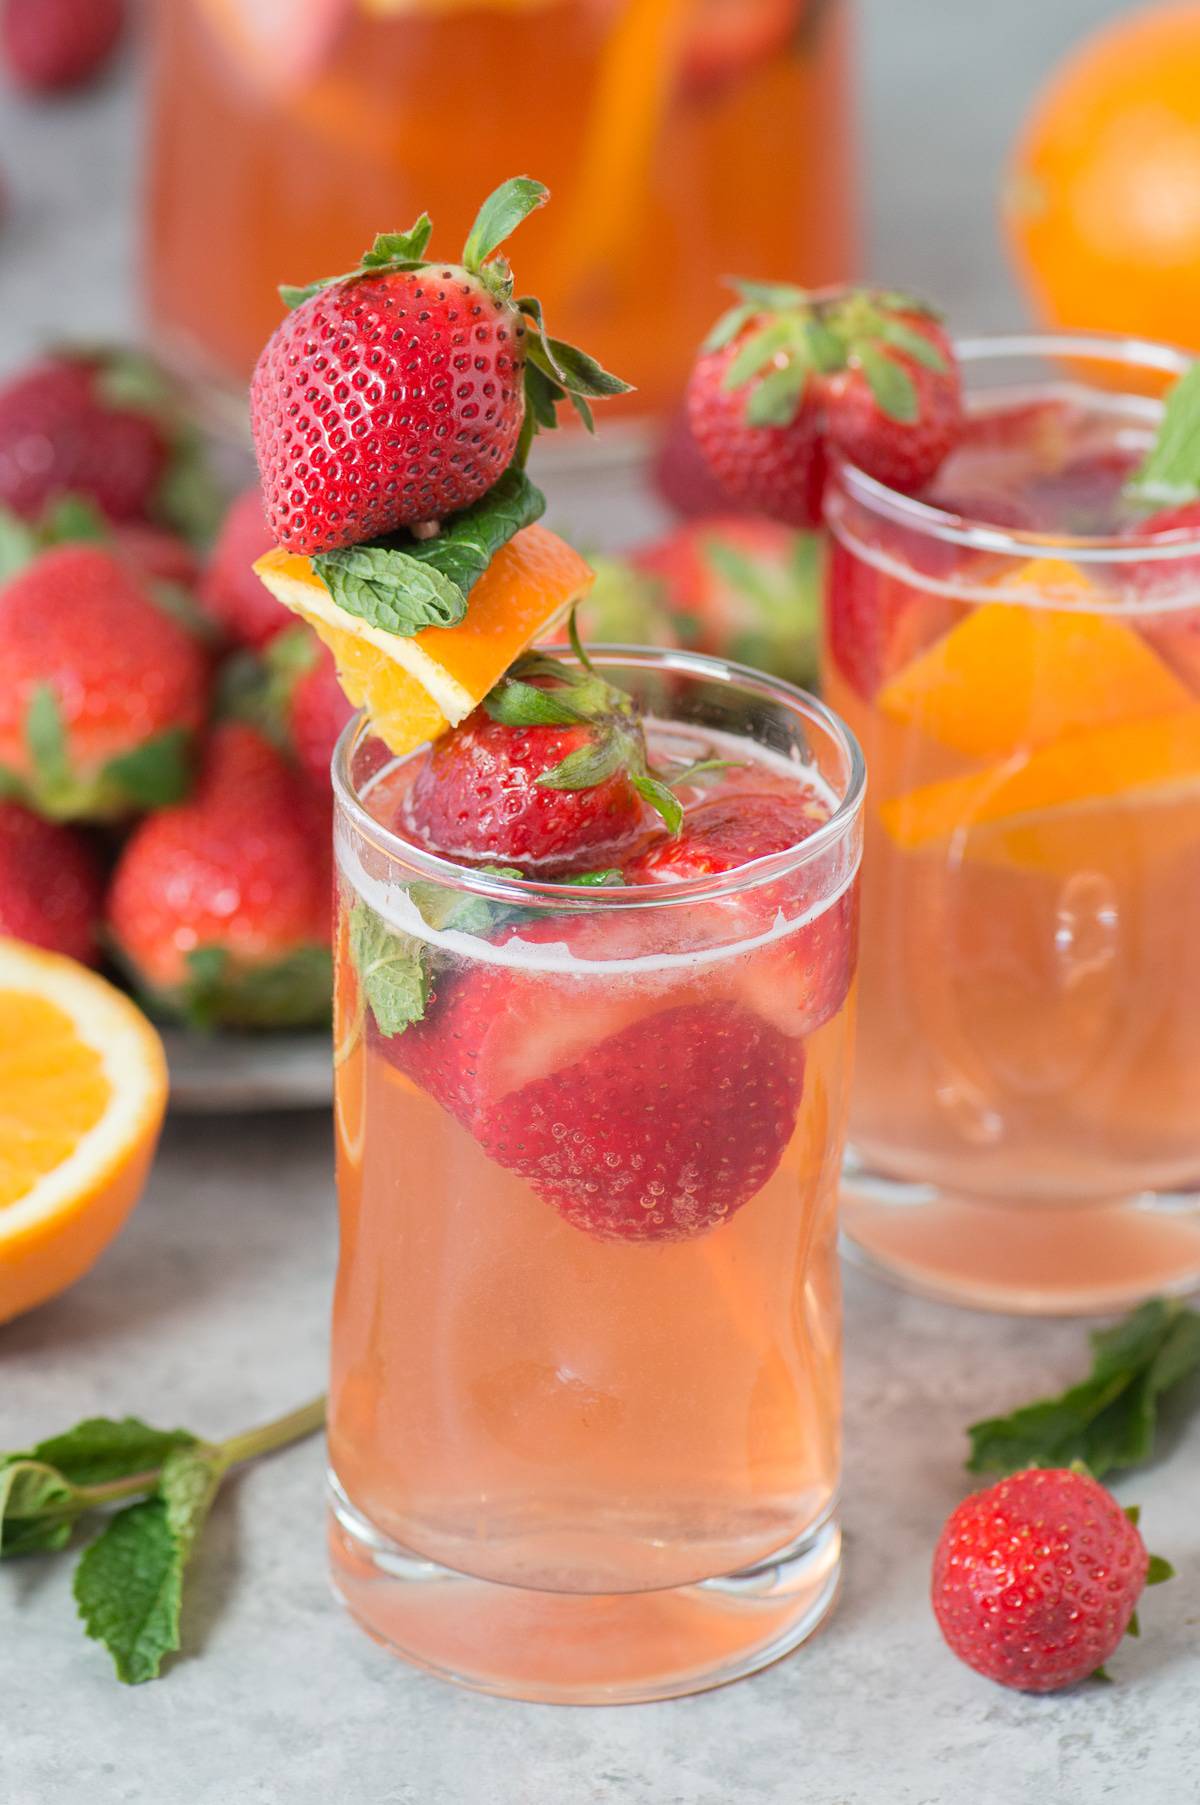 Fruity and refreshing homemade strawberry sangria! Gather up the juiciest strawberries, white wine, and a few other ingredients because you’ll want to make this recipe whenever warm weather hits!